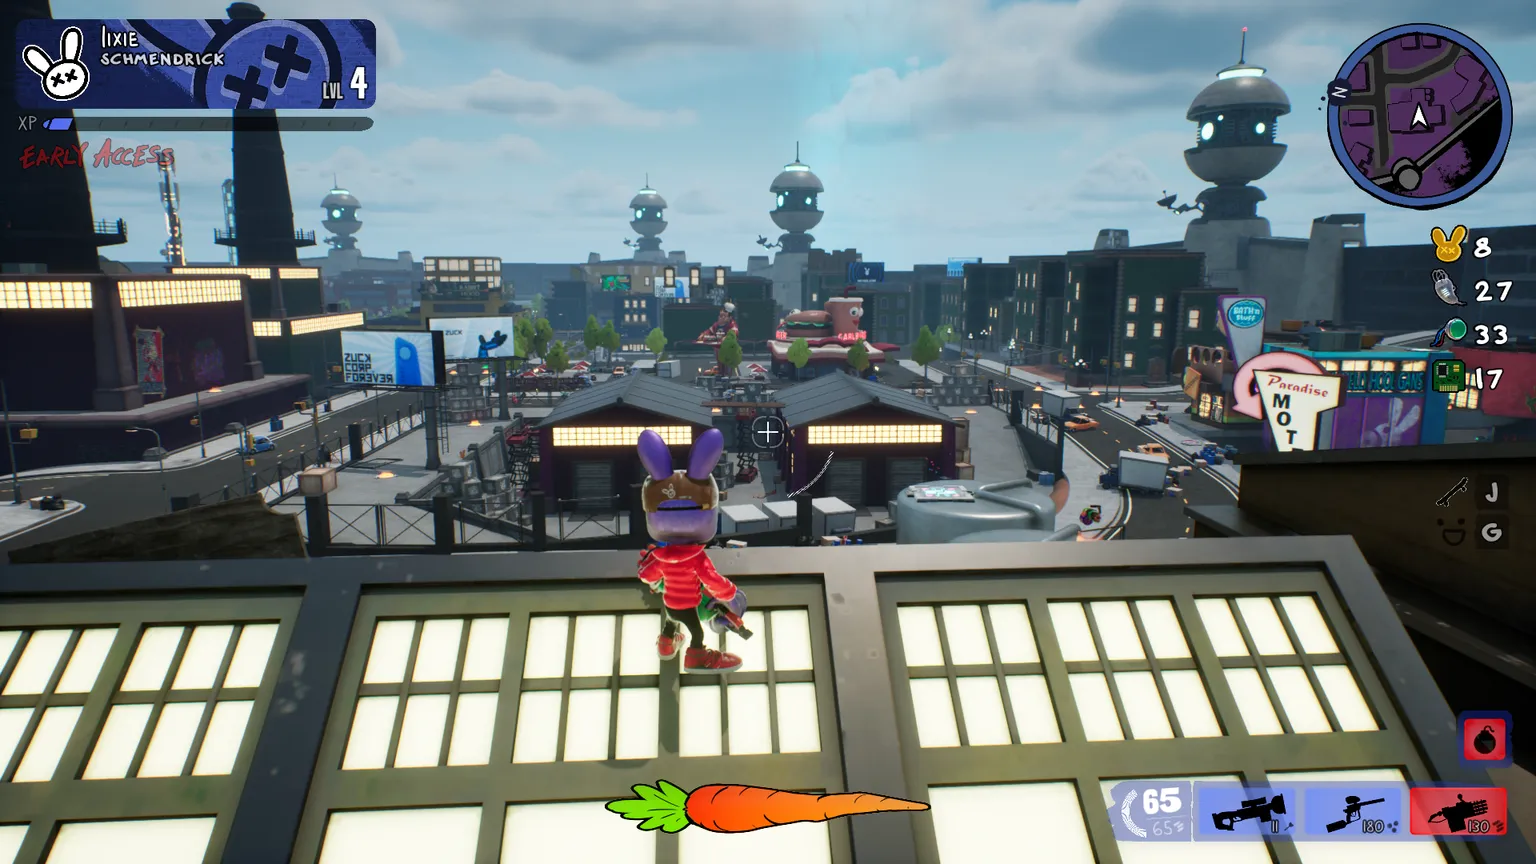 screenshot from My Pet Hooligan game, showing rabbit character standing on a roof looking out over a city.